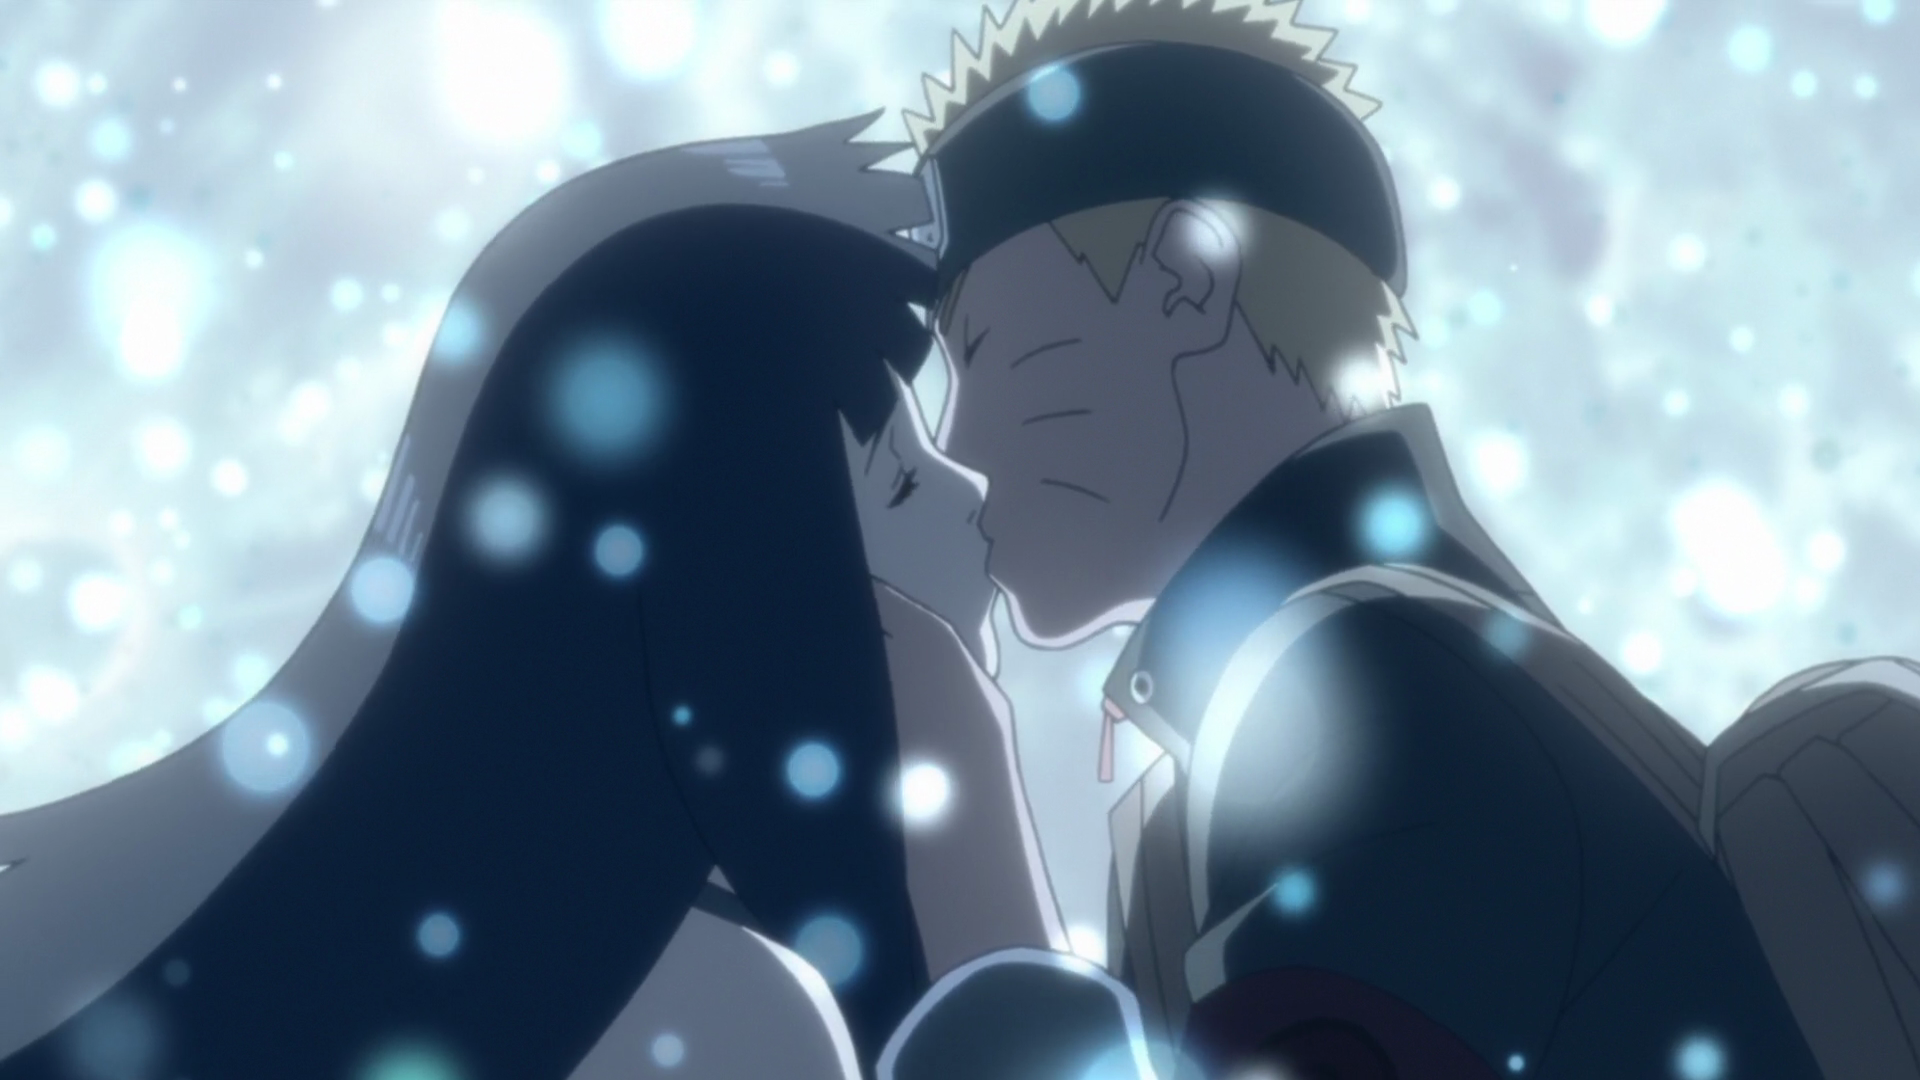 Category:Naruto and Hinata. Legends of the Multi Universe